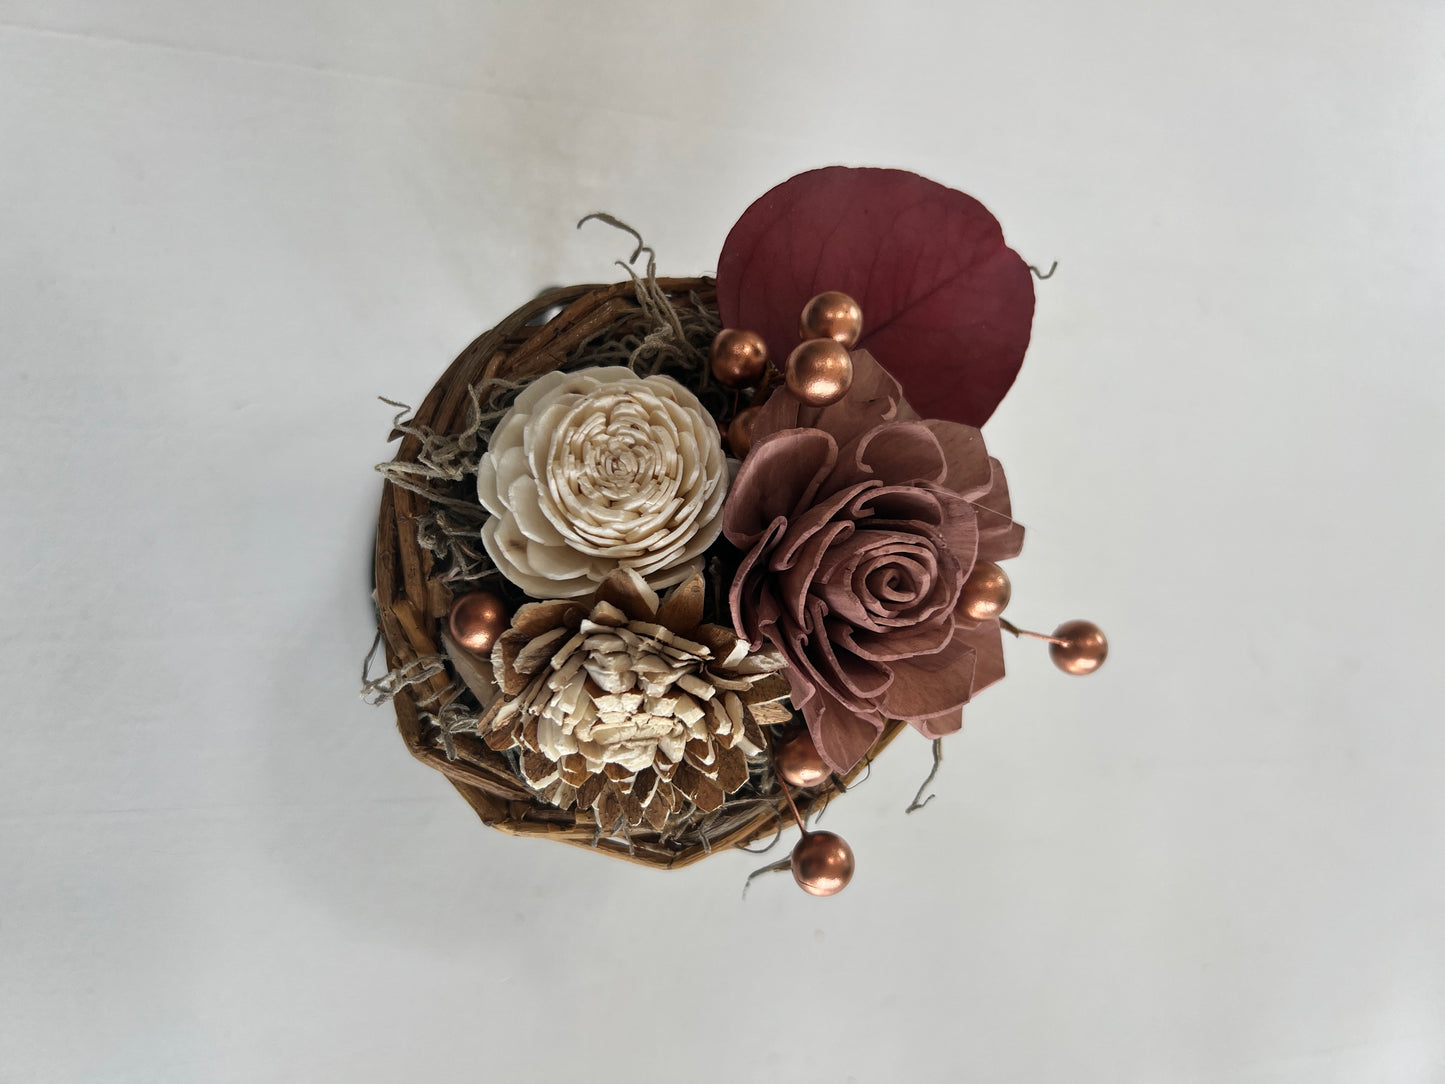 Golden Autumn Treasure: Sola Wood Flower Basket with Pink and Red Blooms